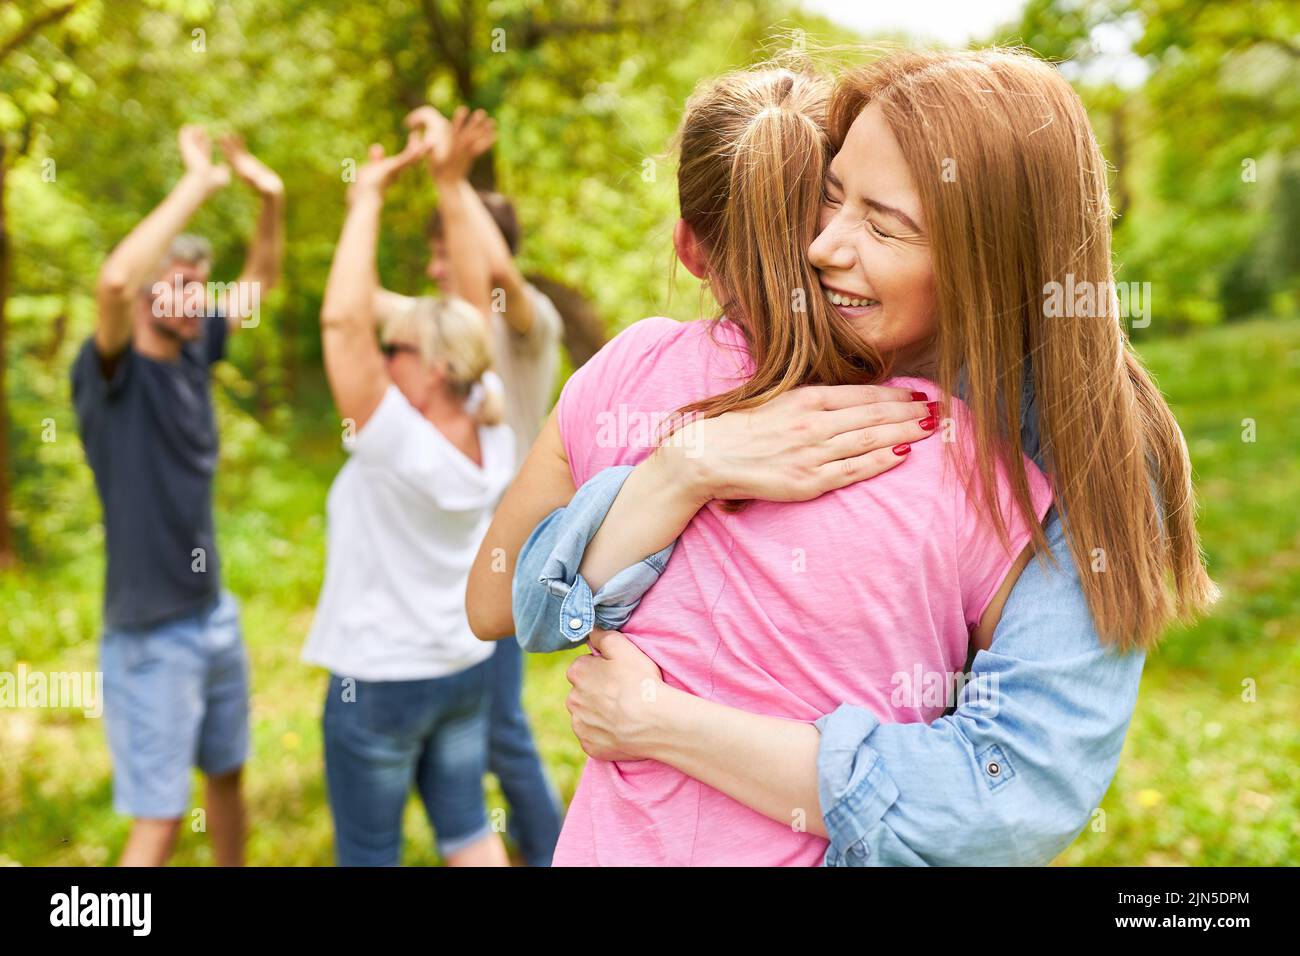 Two girlfriends happily hugging and celebrating a victory with their team Stock Photo